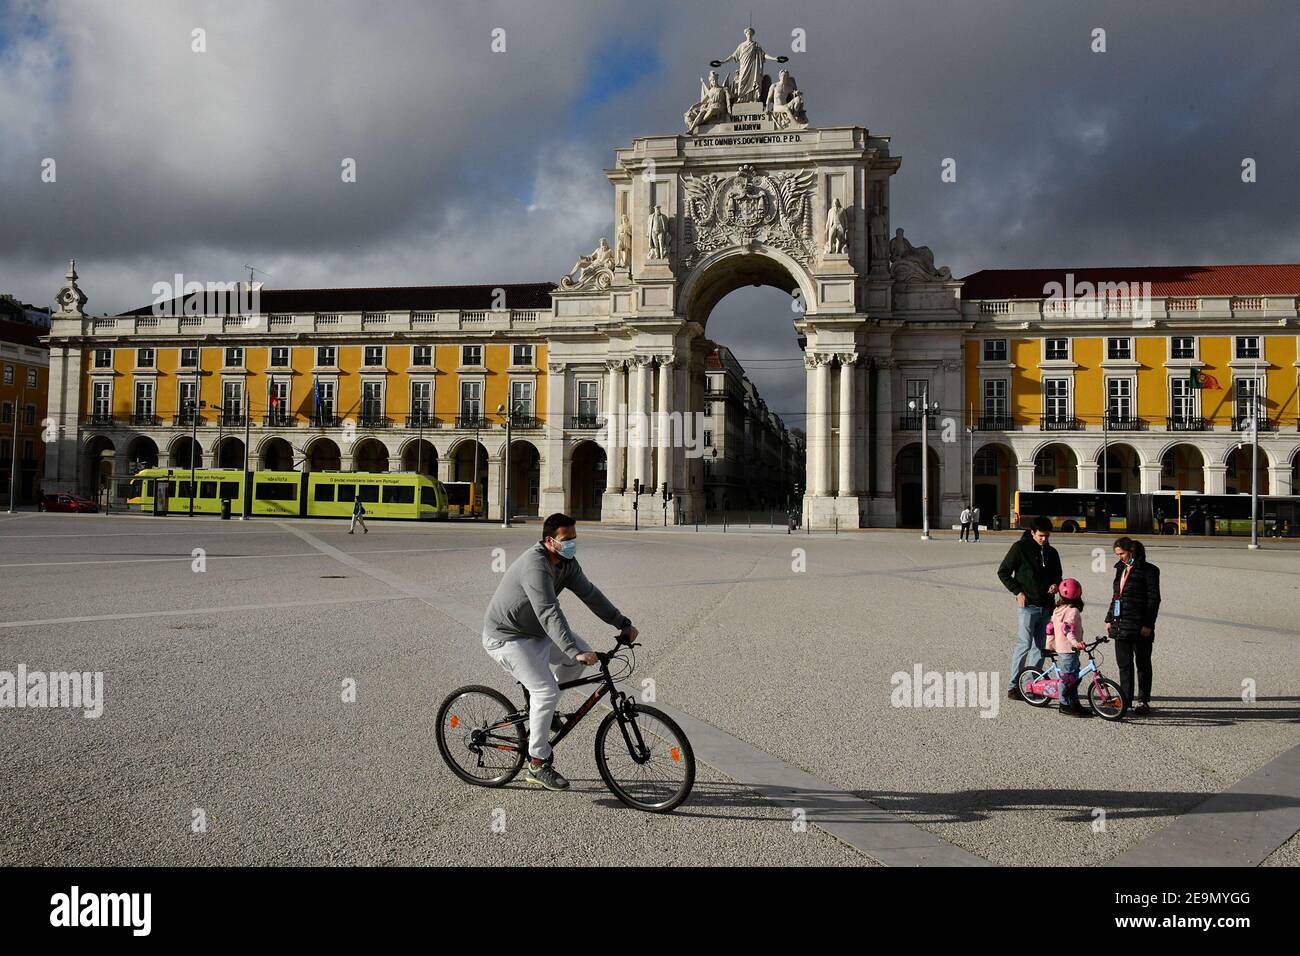 A man wearing a face mask rides his bicycle in Praça de Comercio. Portugal has registered 13,740 deaths and 755,774 confirmed cases since the beginning of the pandemic according to the bulletin of the General Health Department (DGS). Stock Photo